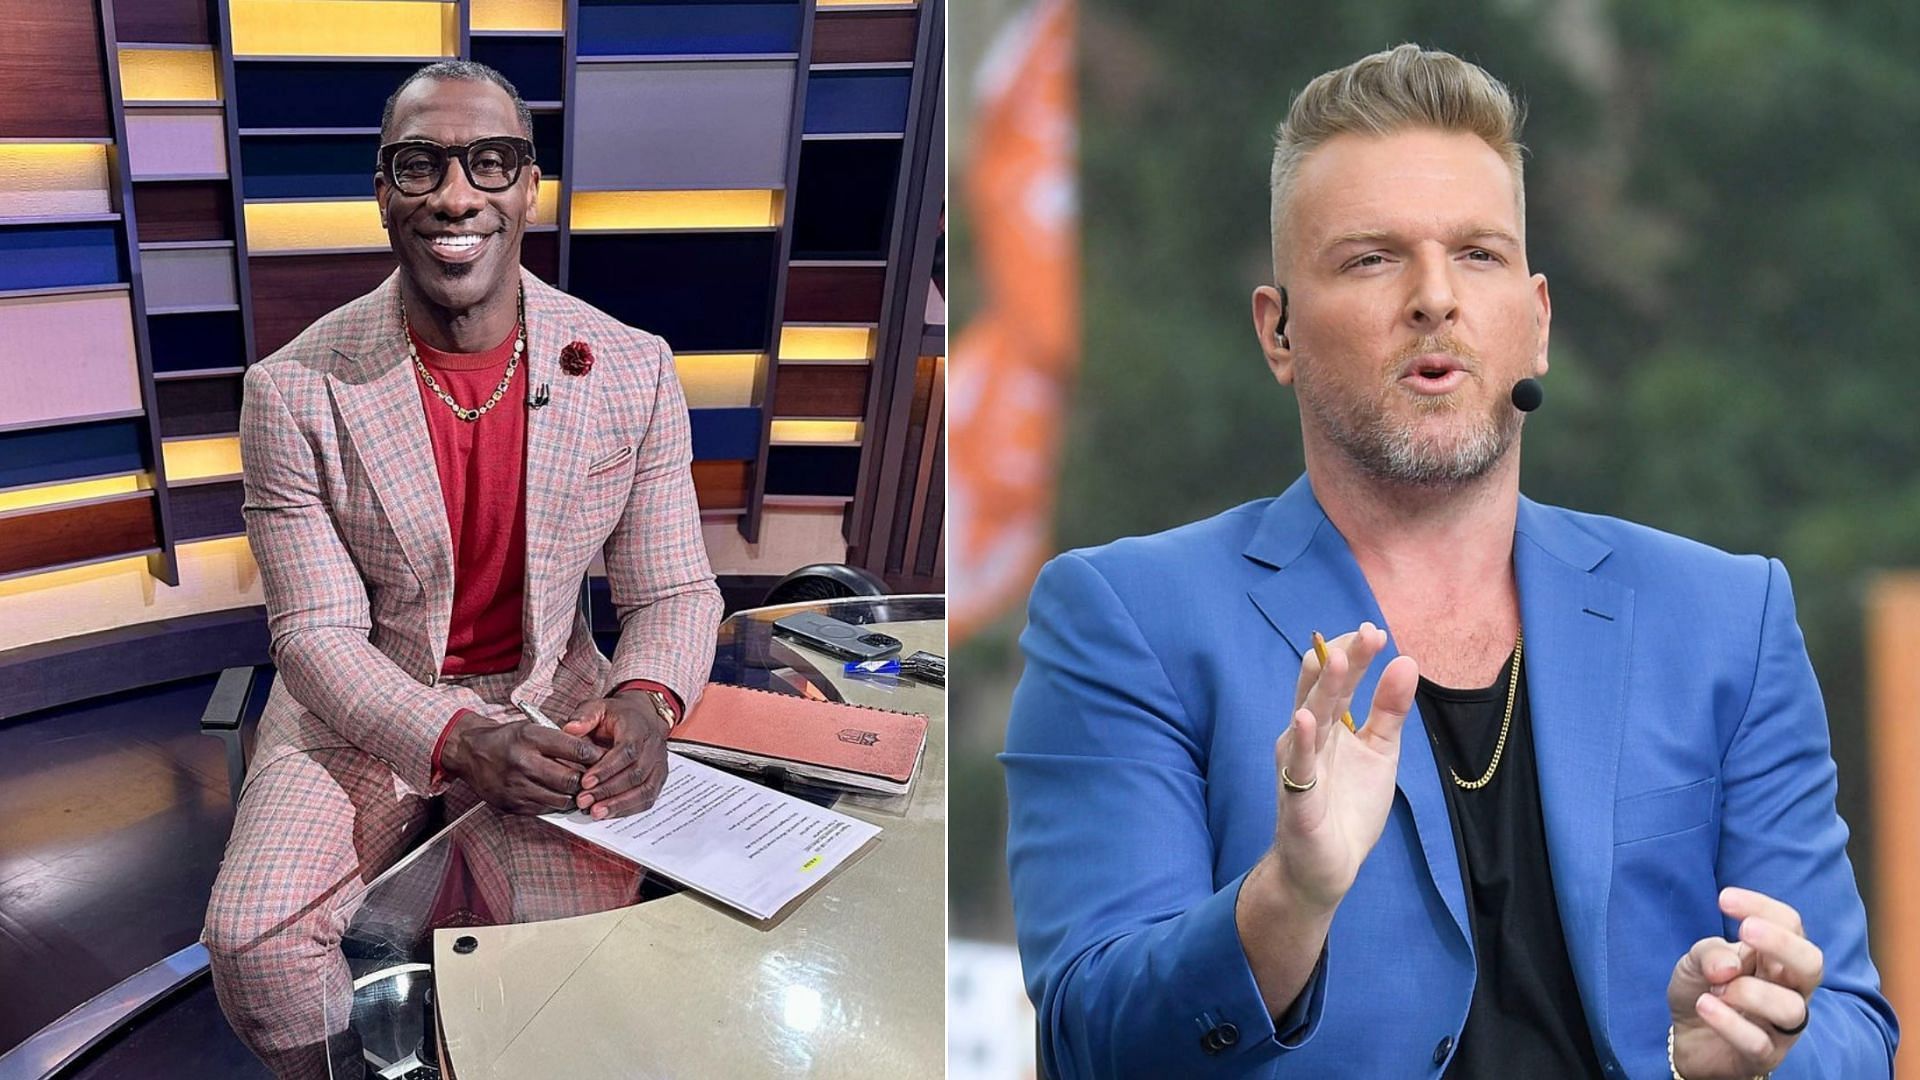 Reddit users have conspiracy theory surrounding Shannon Sharpe (L), Pat McAFee (R), and ESPN